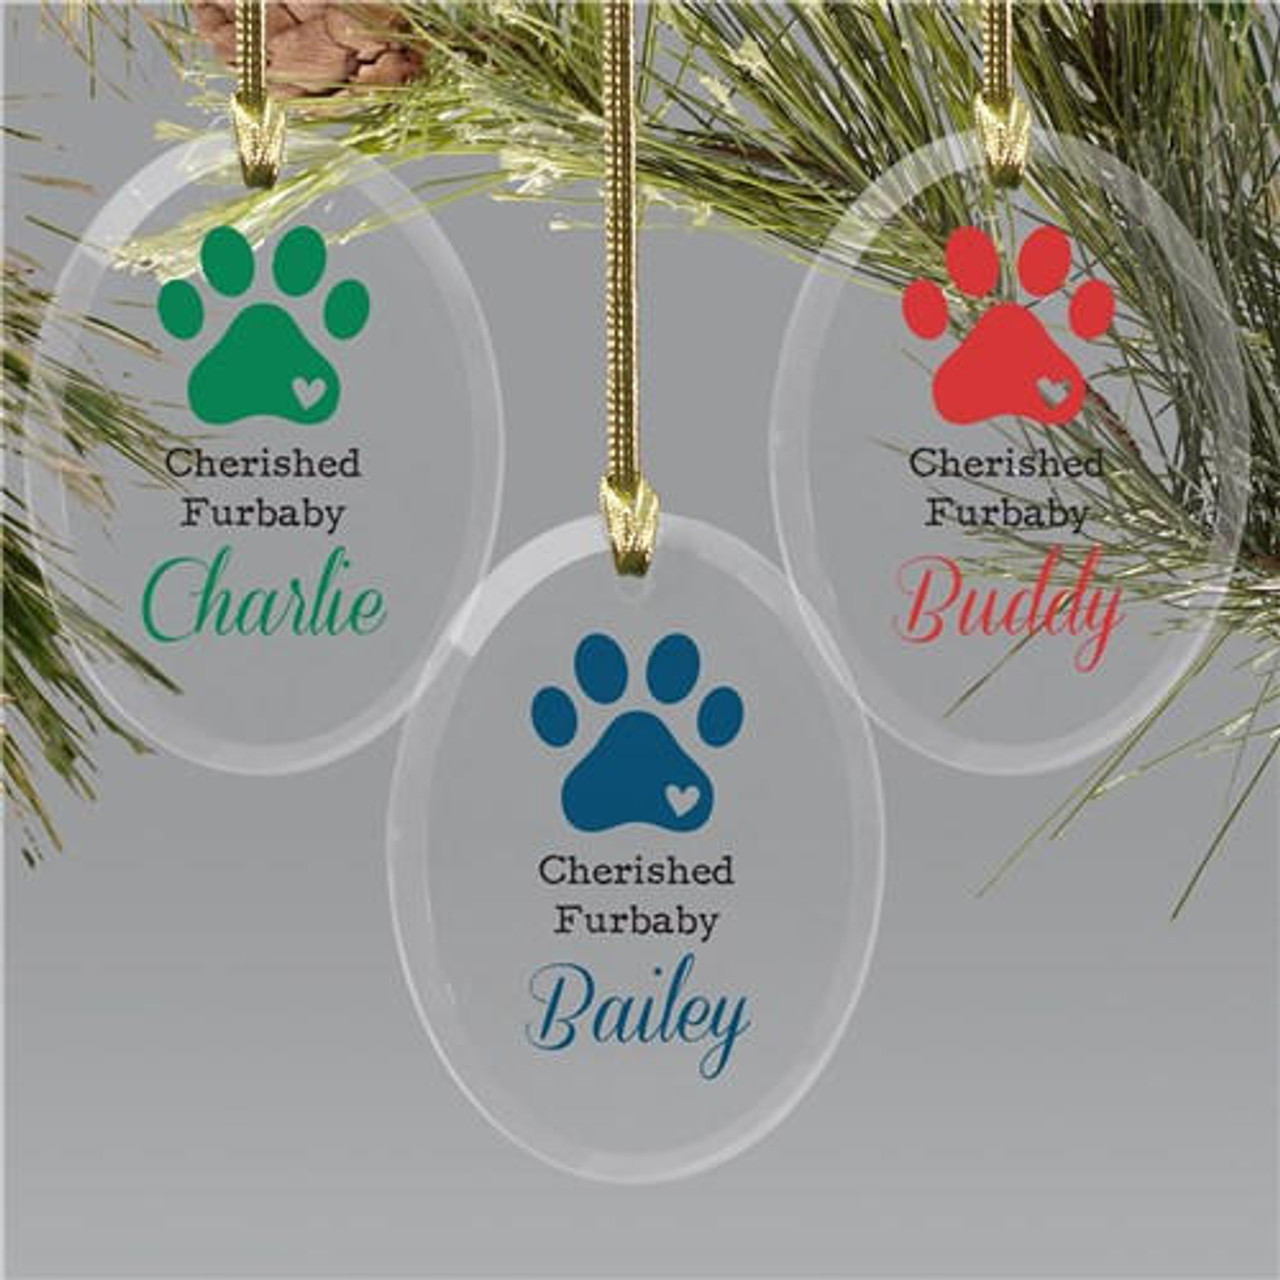 Personalized Gifts Personalized Cherished Furbaby Oval Glass Ornament 